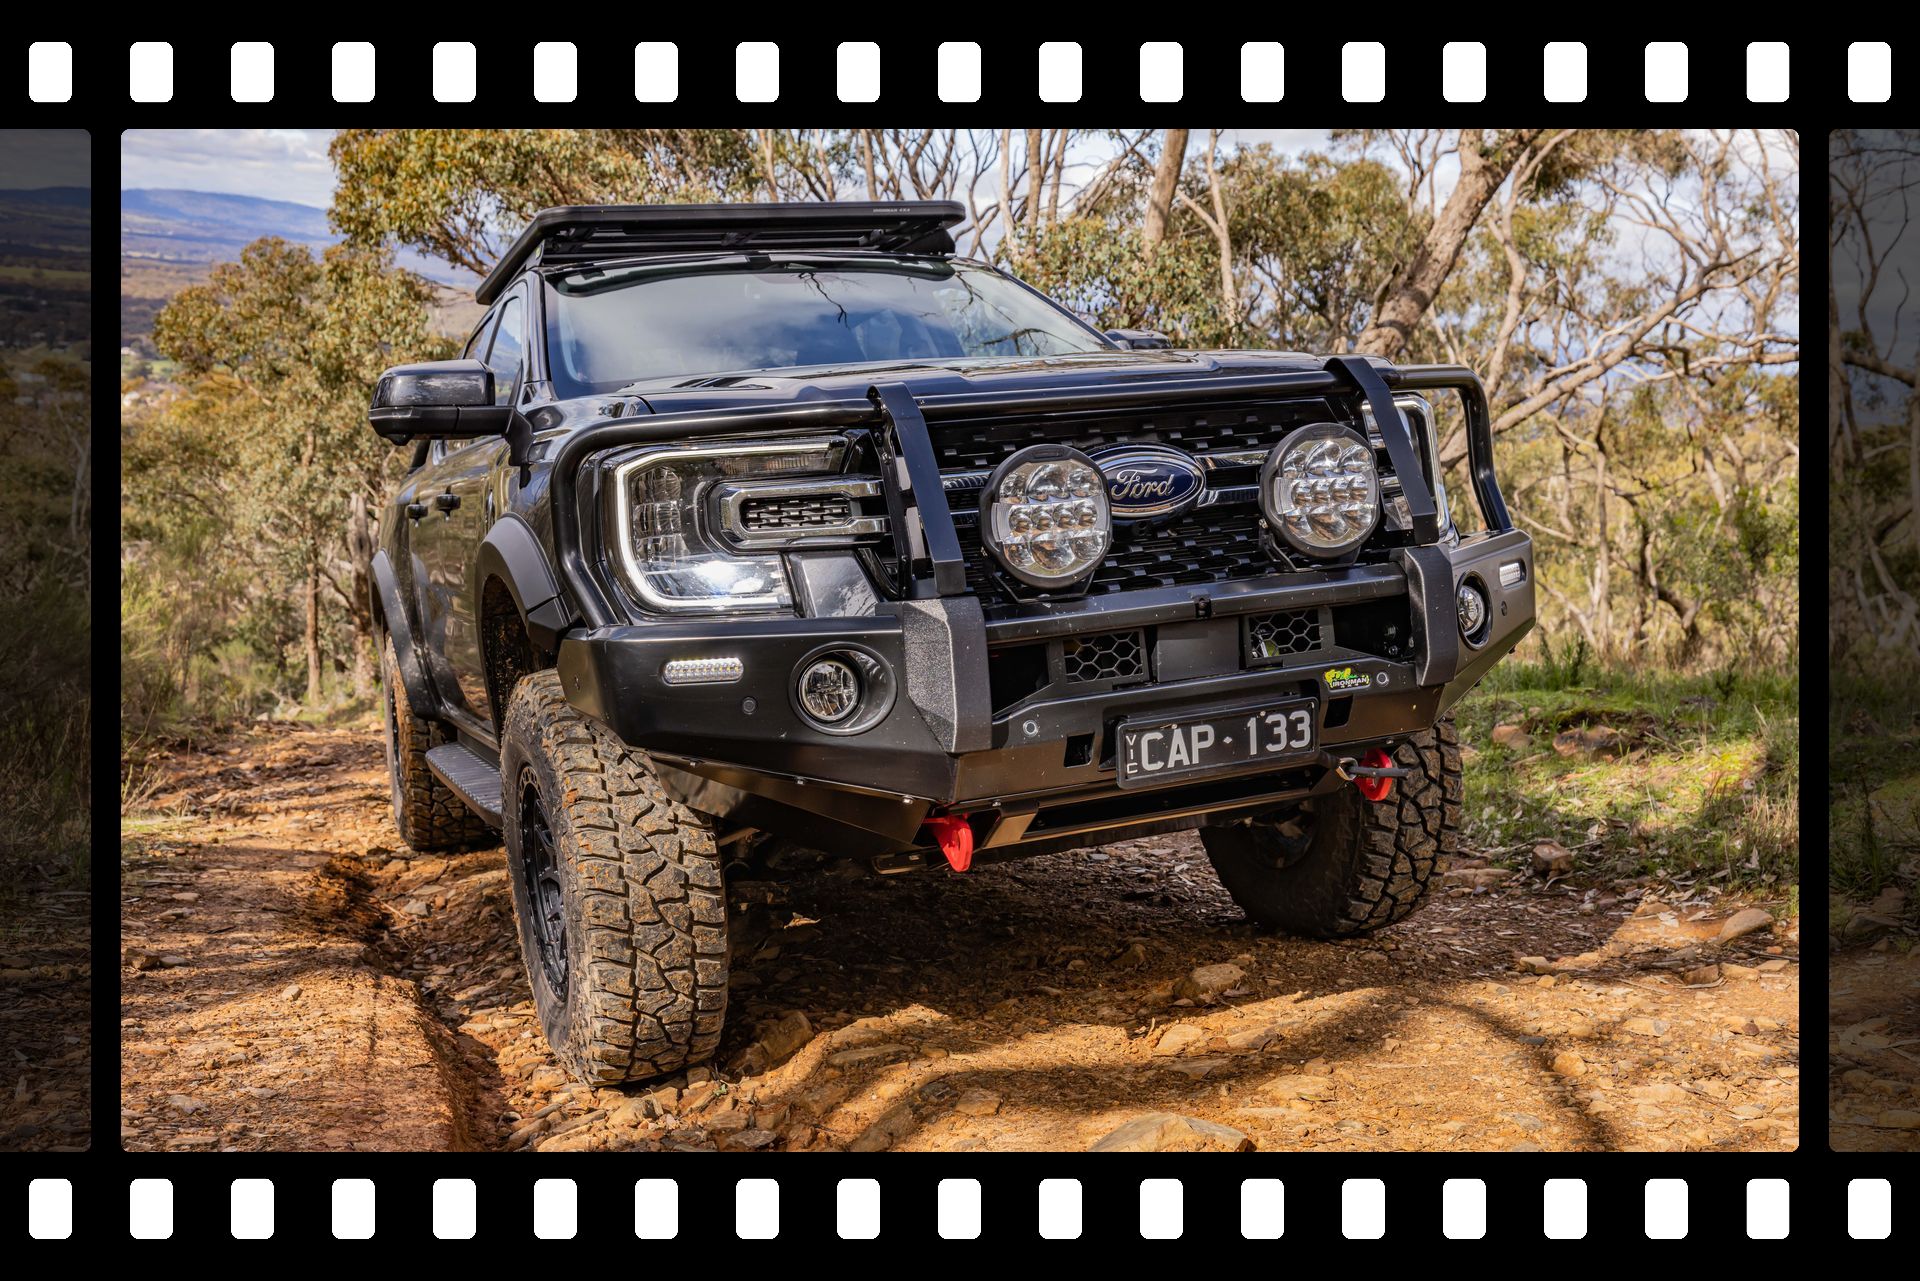 Bull Bar Installed on Ford Everest — Off Road Accessories in Wangaratta, VIC